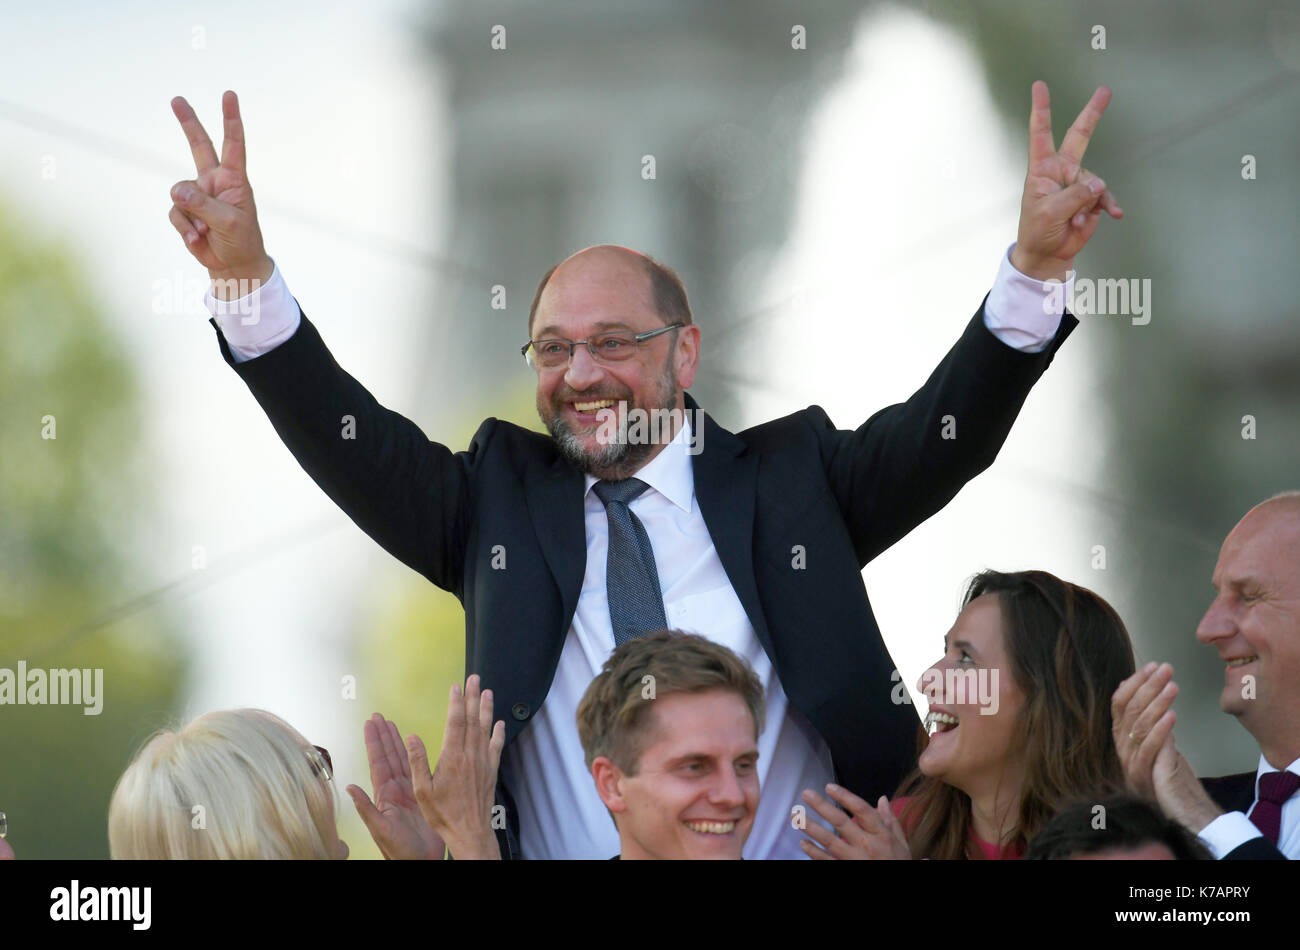 Potsdam, Germany. 15th Sep, 2017. Martin Schulz, candidate for chancellorship from the Social Democratic Party of Germany (SPD) making peace signs after the election rally of his party in Potsdam, Germany, 15 September 2017. Photo: Ralf Hirschberger/dpa-Zentralbild/dpa/Alamy Live News Stock Photo